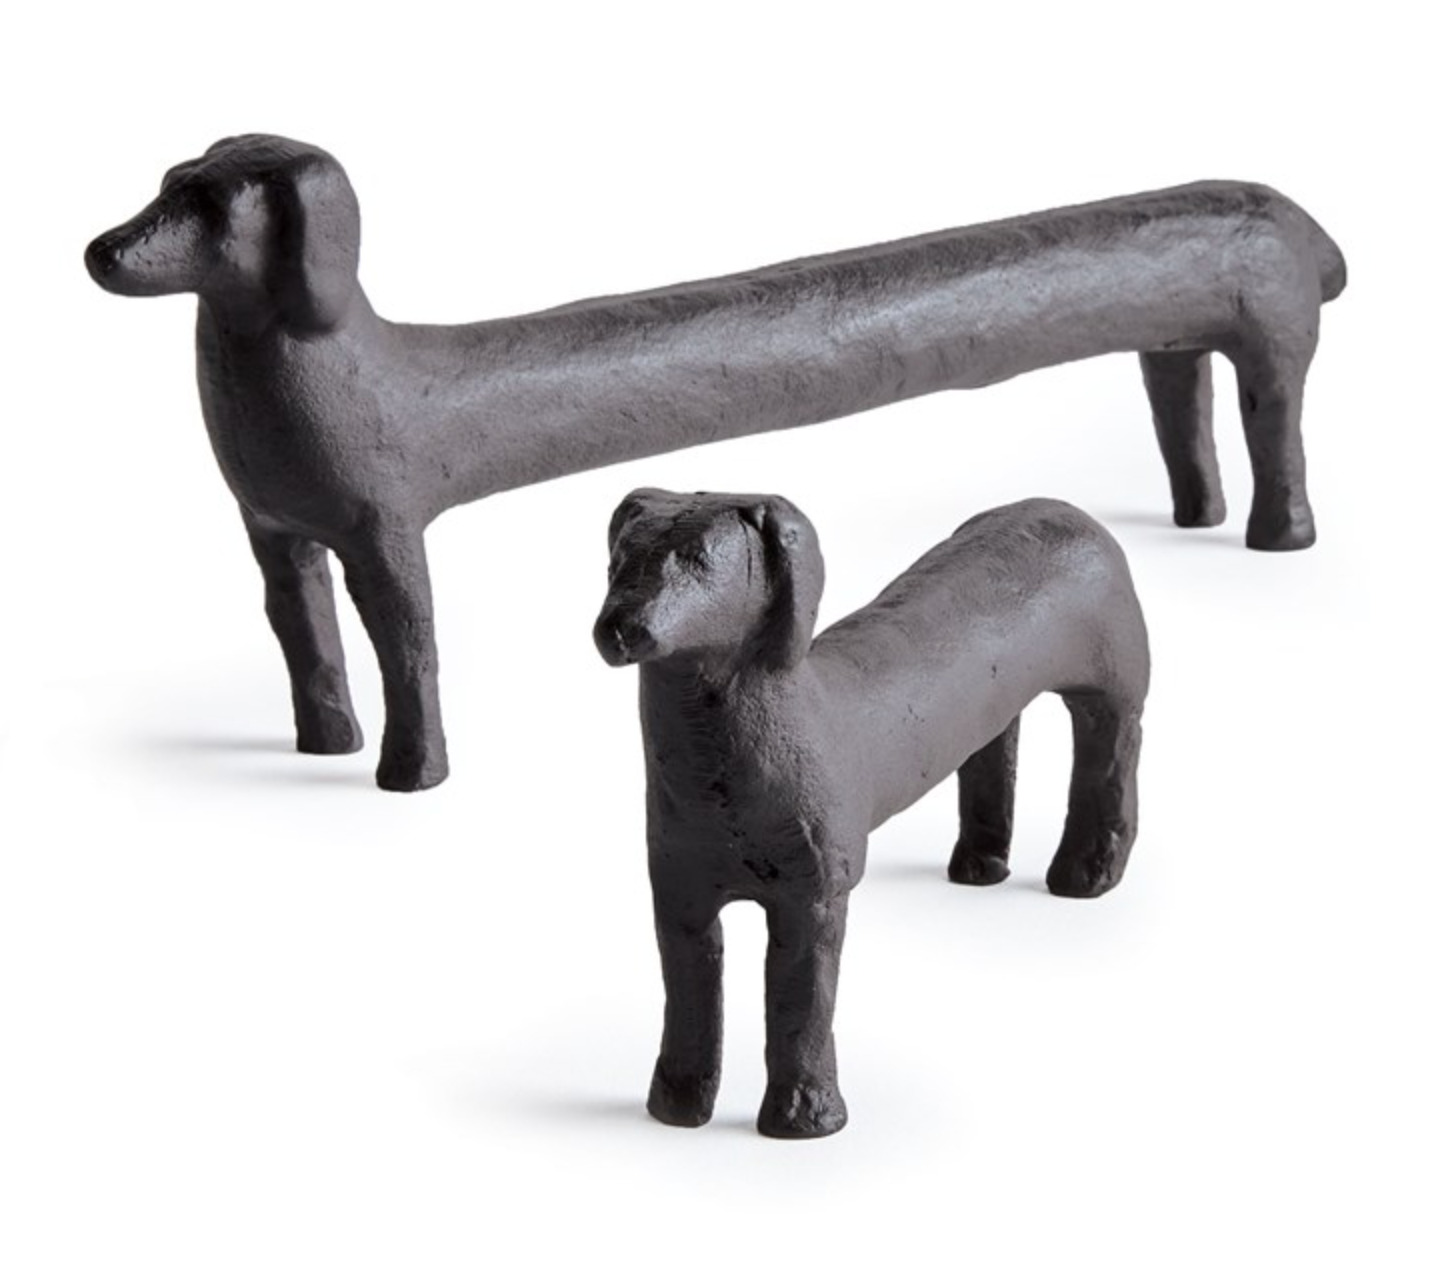 Set of Two CONNLEY DOGS Weiner Dogs DACHSHUND Napa Home & Garden N4RB10BK NeW